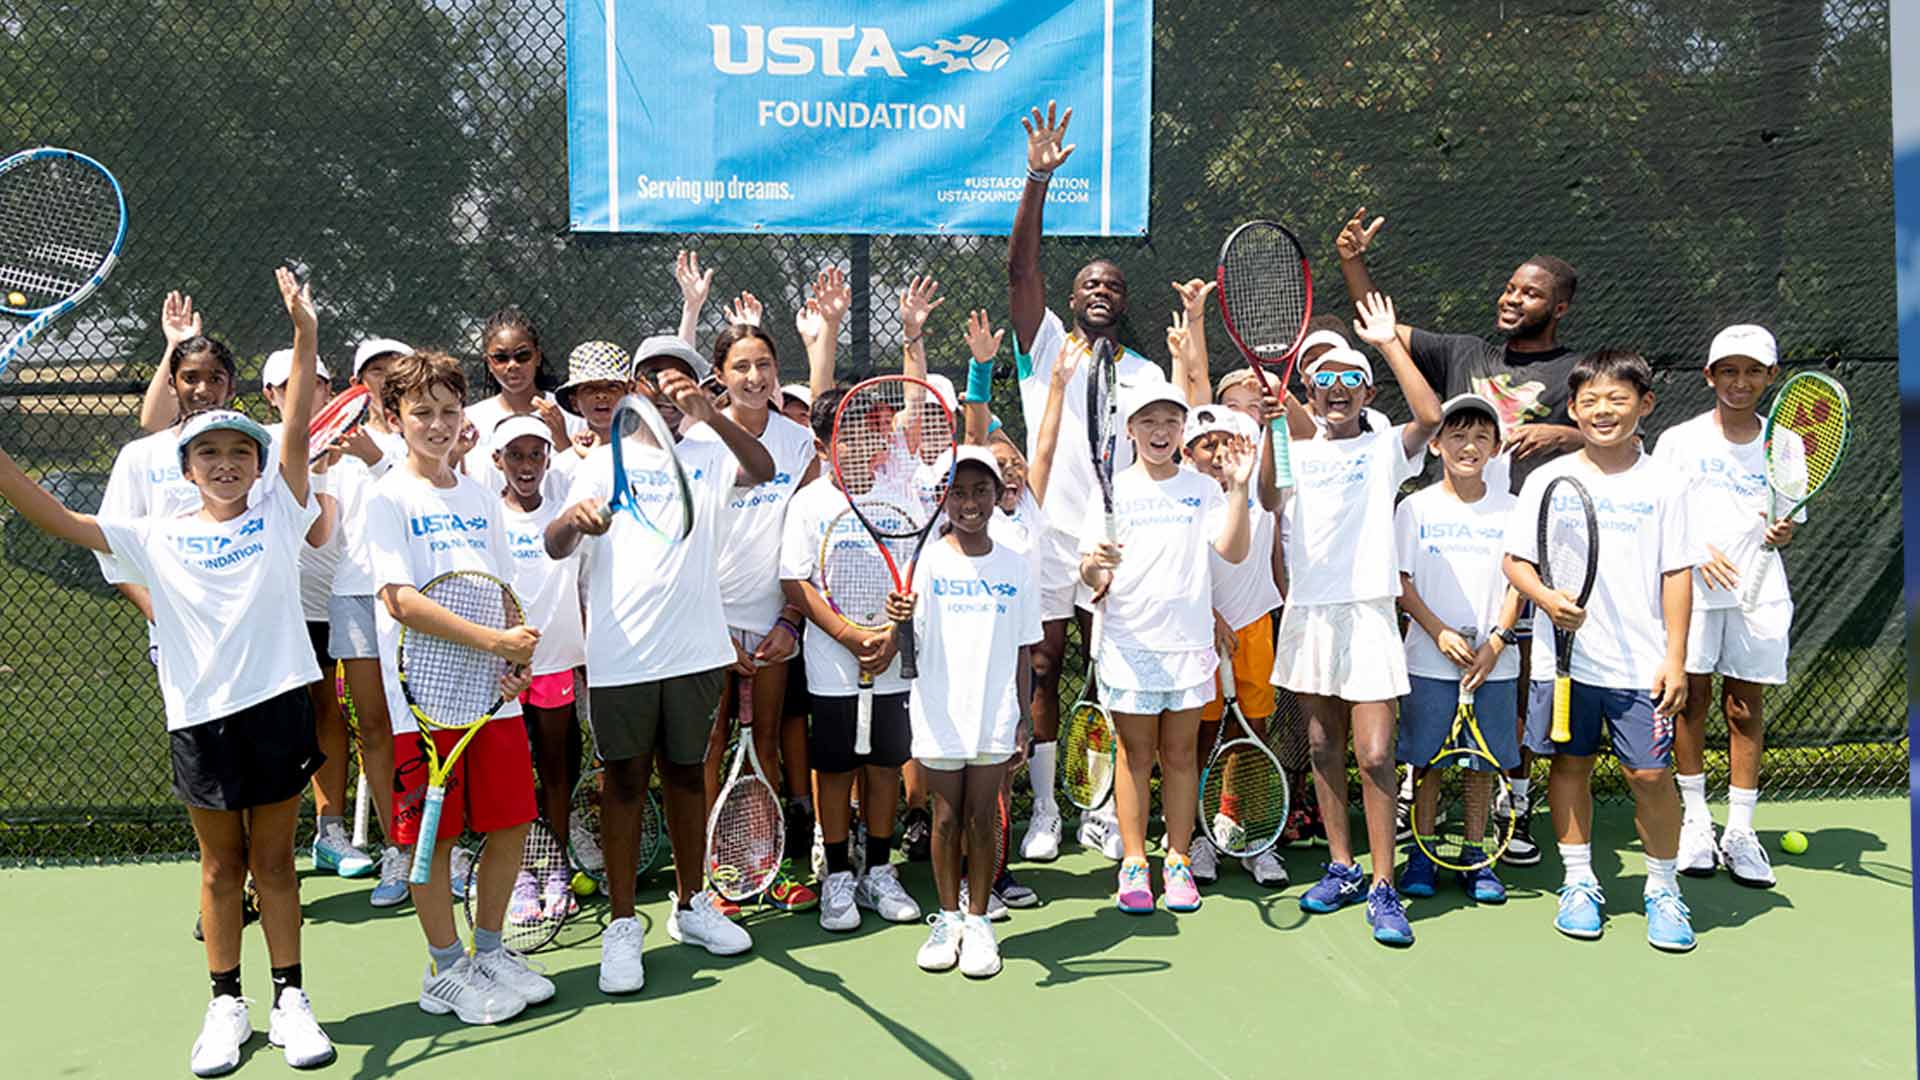 Frances Tiafoe Fund To Help Kids In Need